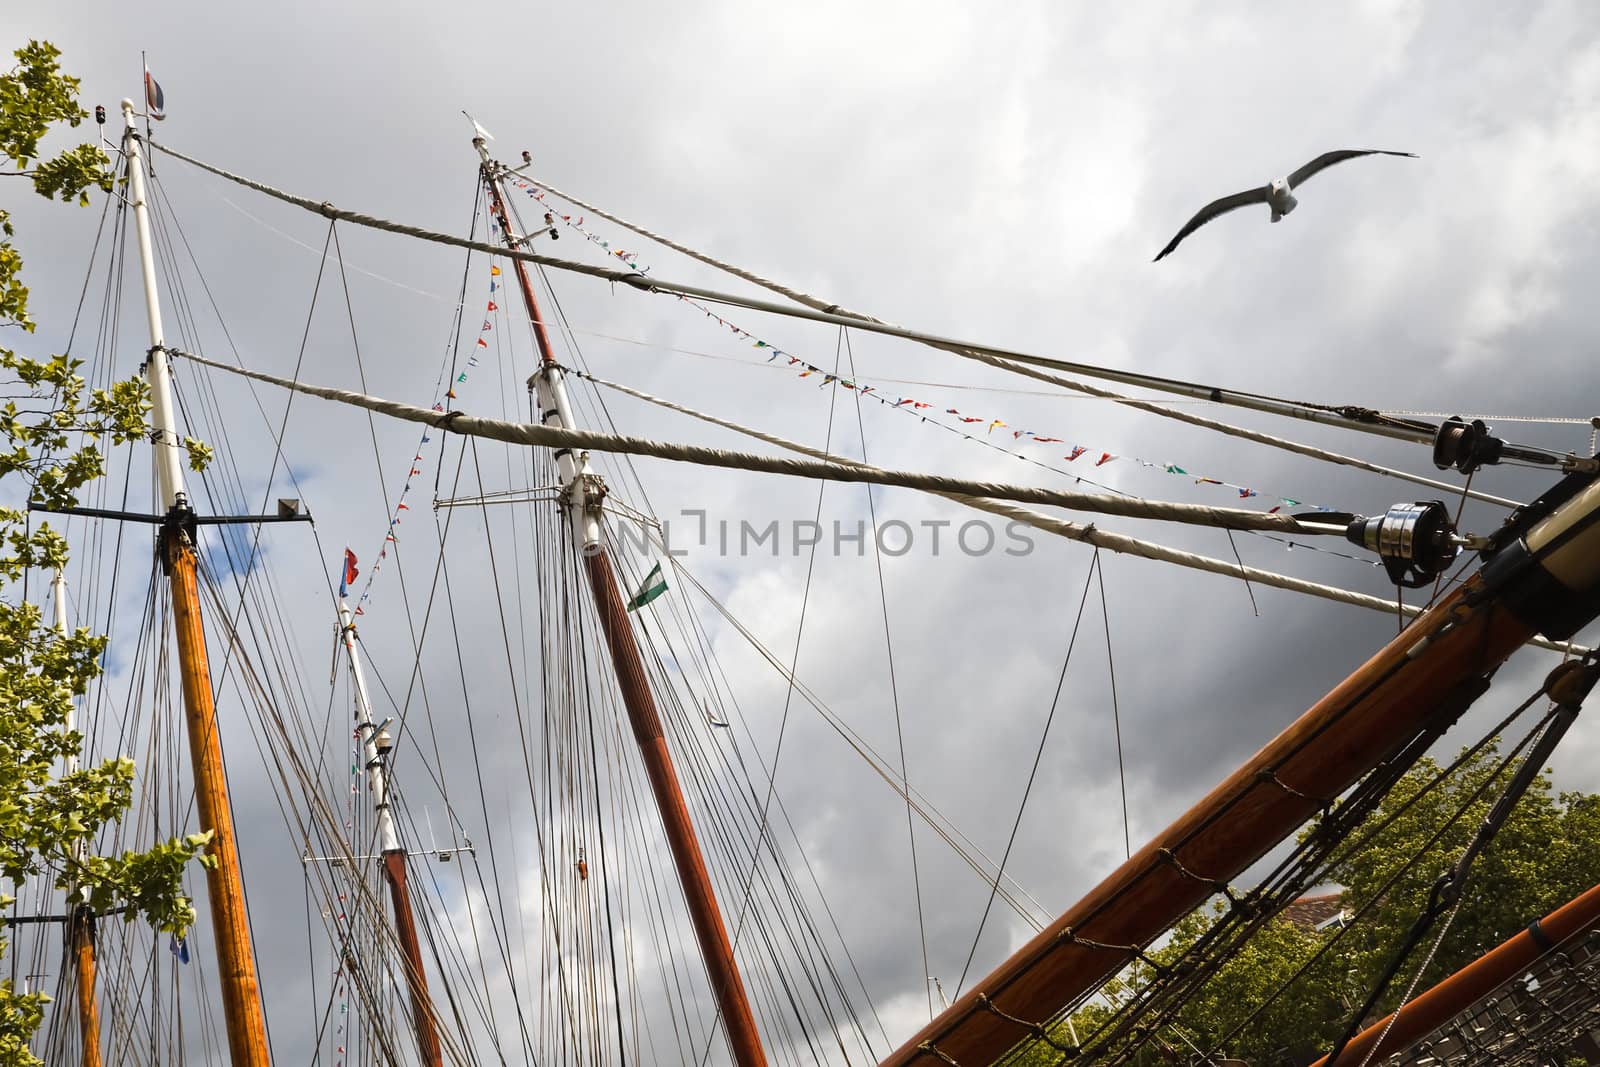 Masts, ropes and rainclouds by Colette